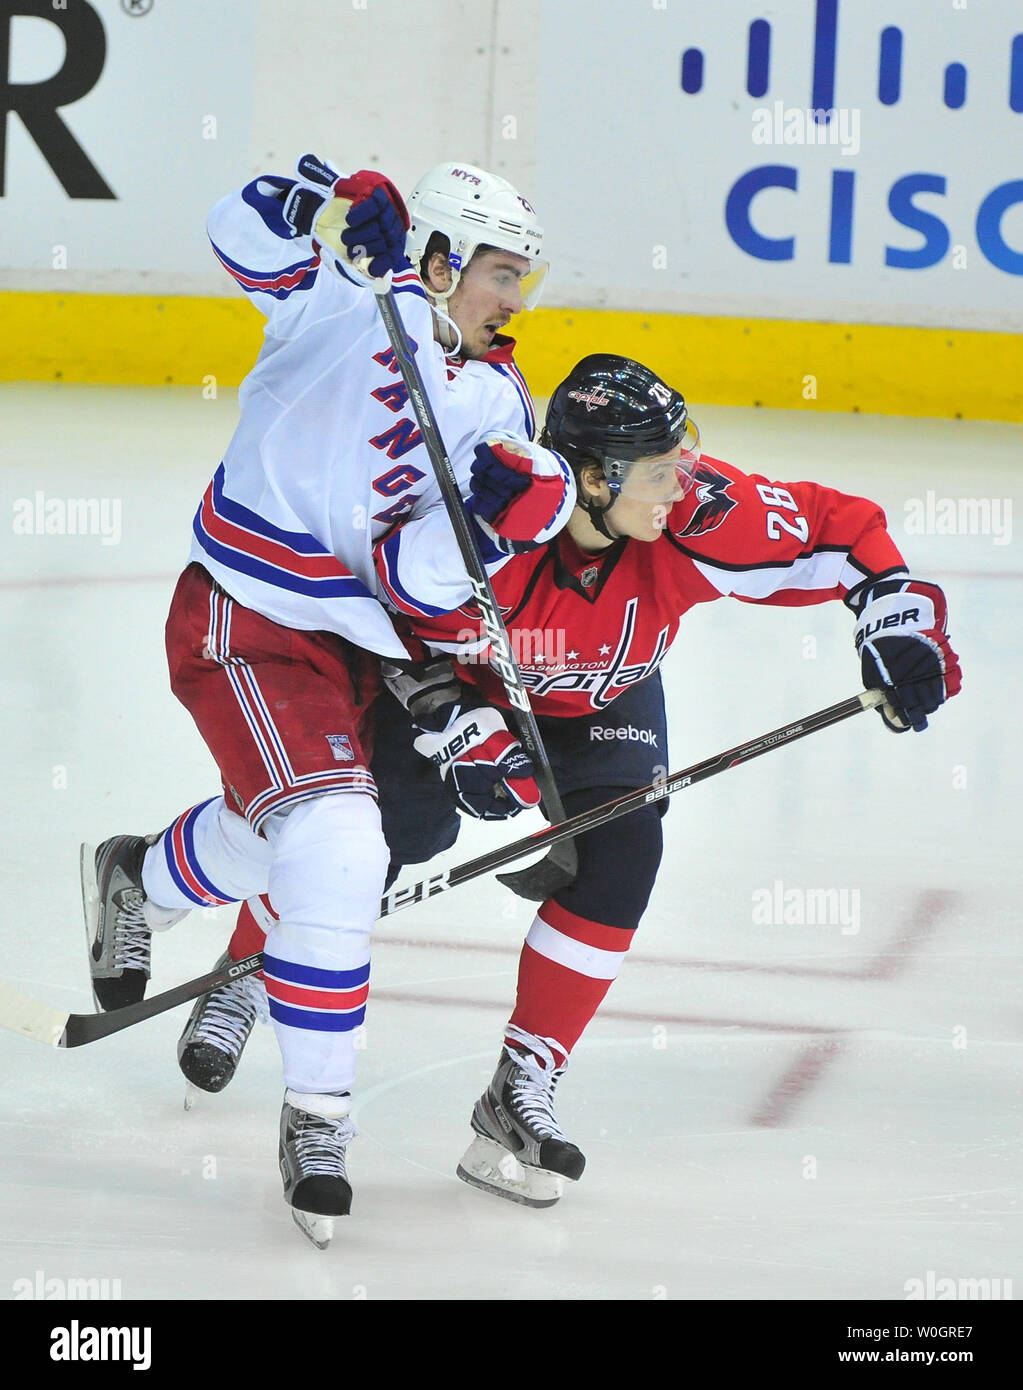 New York Rangers Derek Stepan and Washington Capitals Alexander Semin fight for position during the second overtime period in game 3 of the NHL Eastern Conference Semifinals at the Verizon Center in Washington, D.C. on May 2, 2012.  UPI/Kevin Dietsch Stock Photo